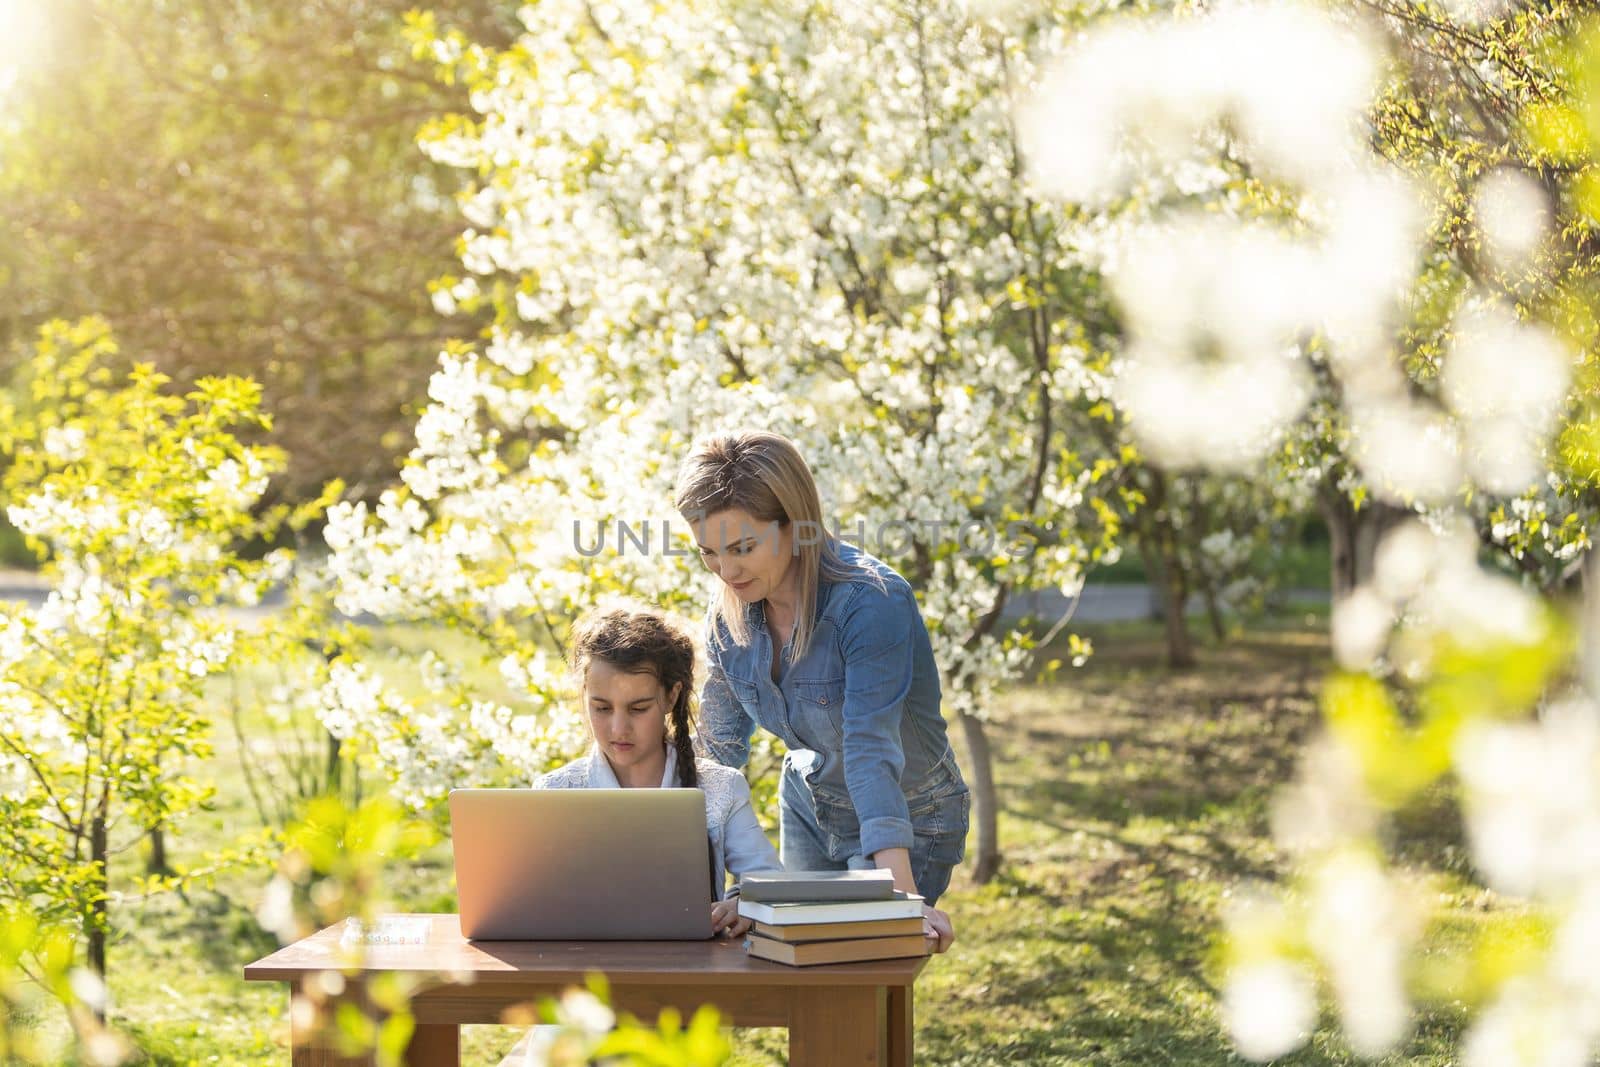 Woman and little girl laying on the spring flower field outdoors - having fun using a laptop